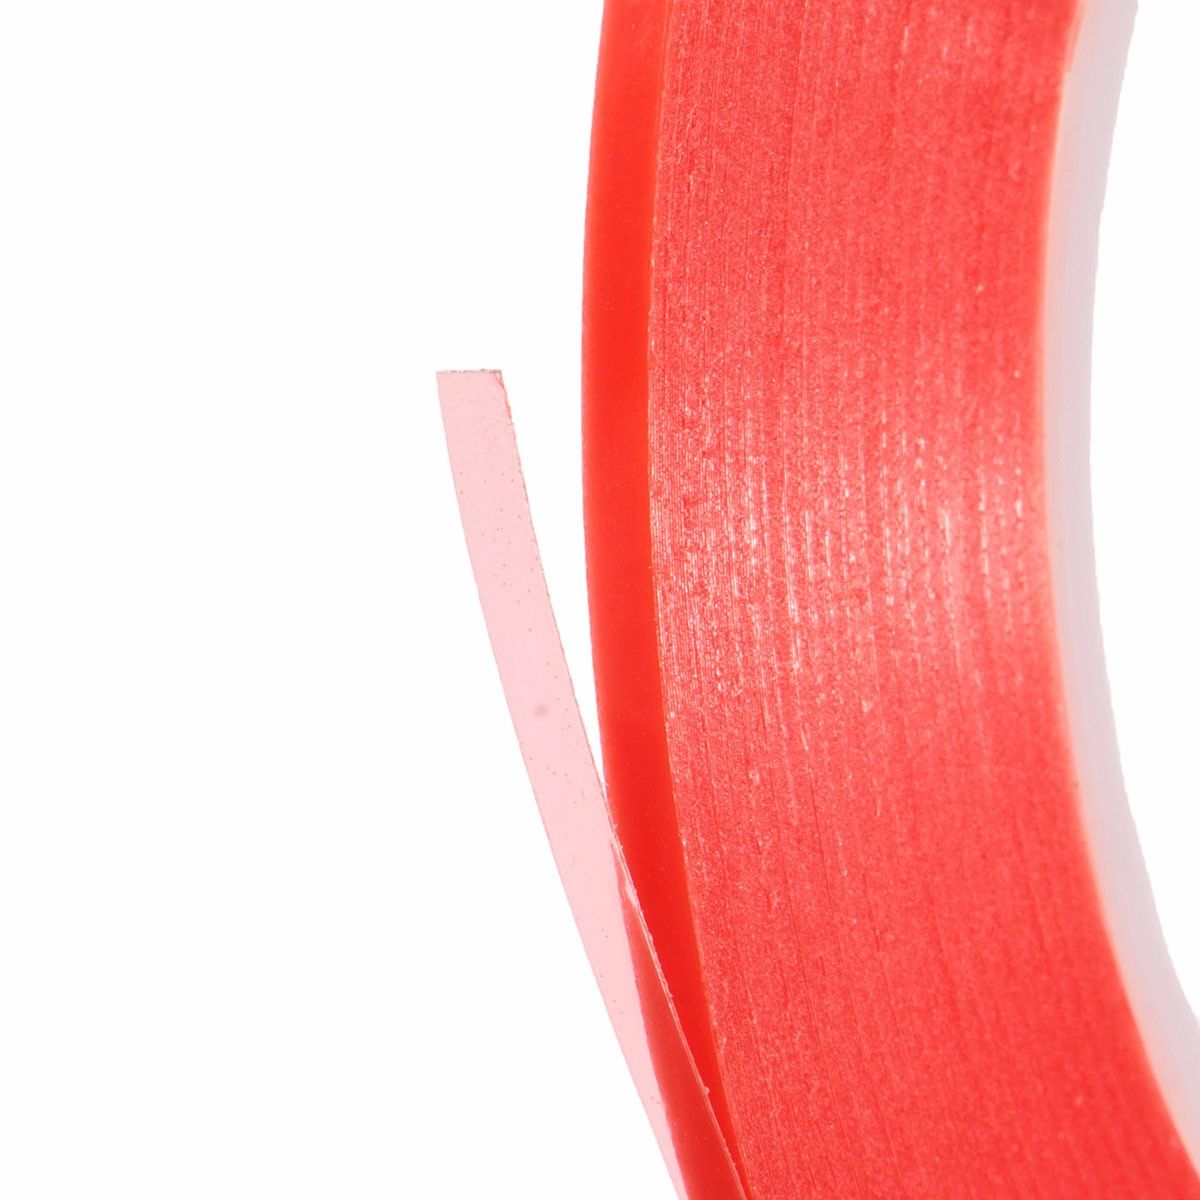 2mm-Adhesive-Double-Side-Tape-Strong-Sticky-For-Samsung-iPhone-Cell-Phone-Repair-1010750